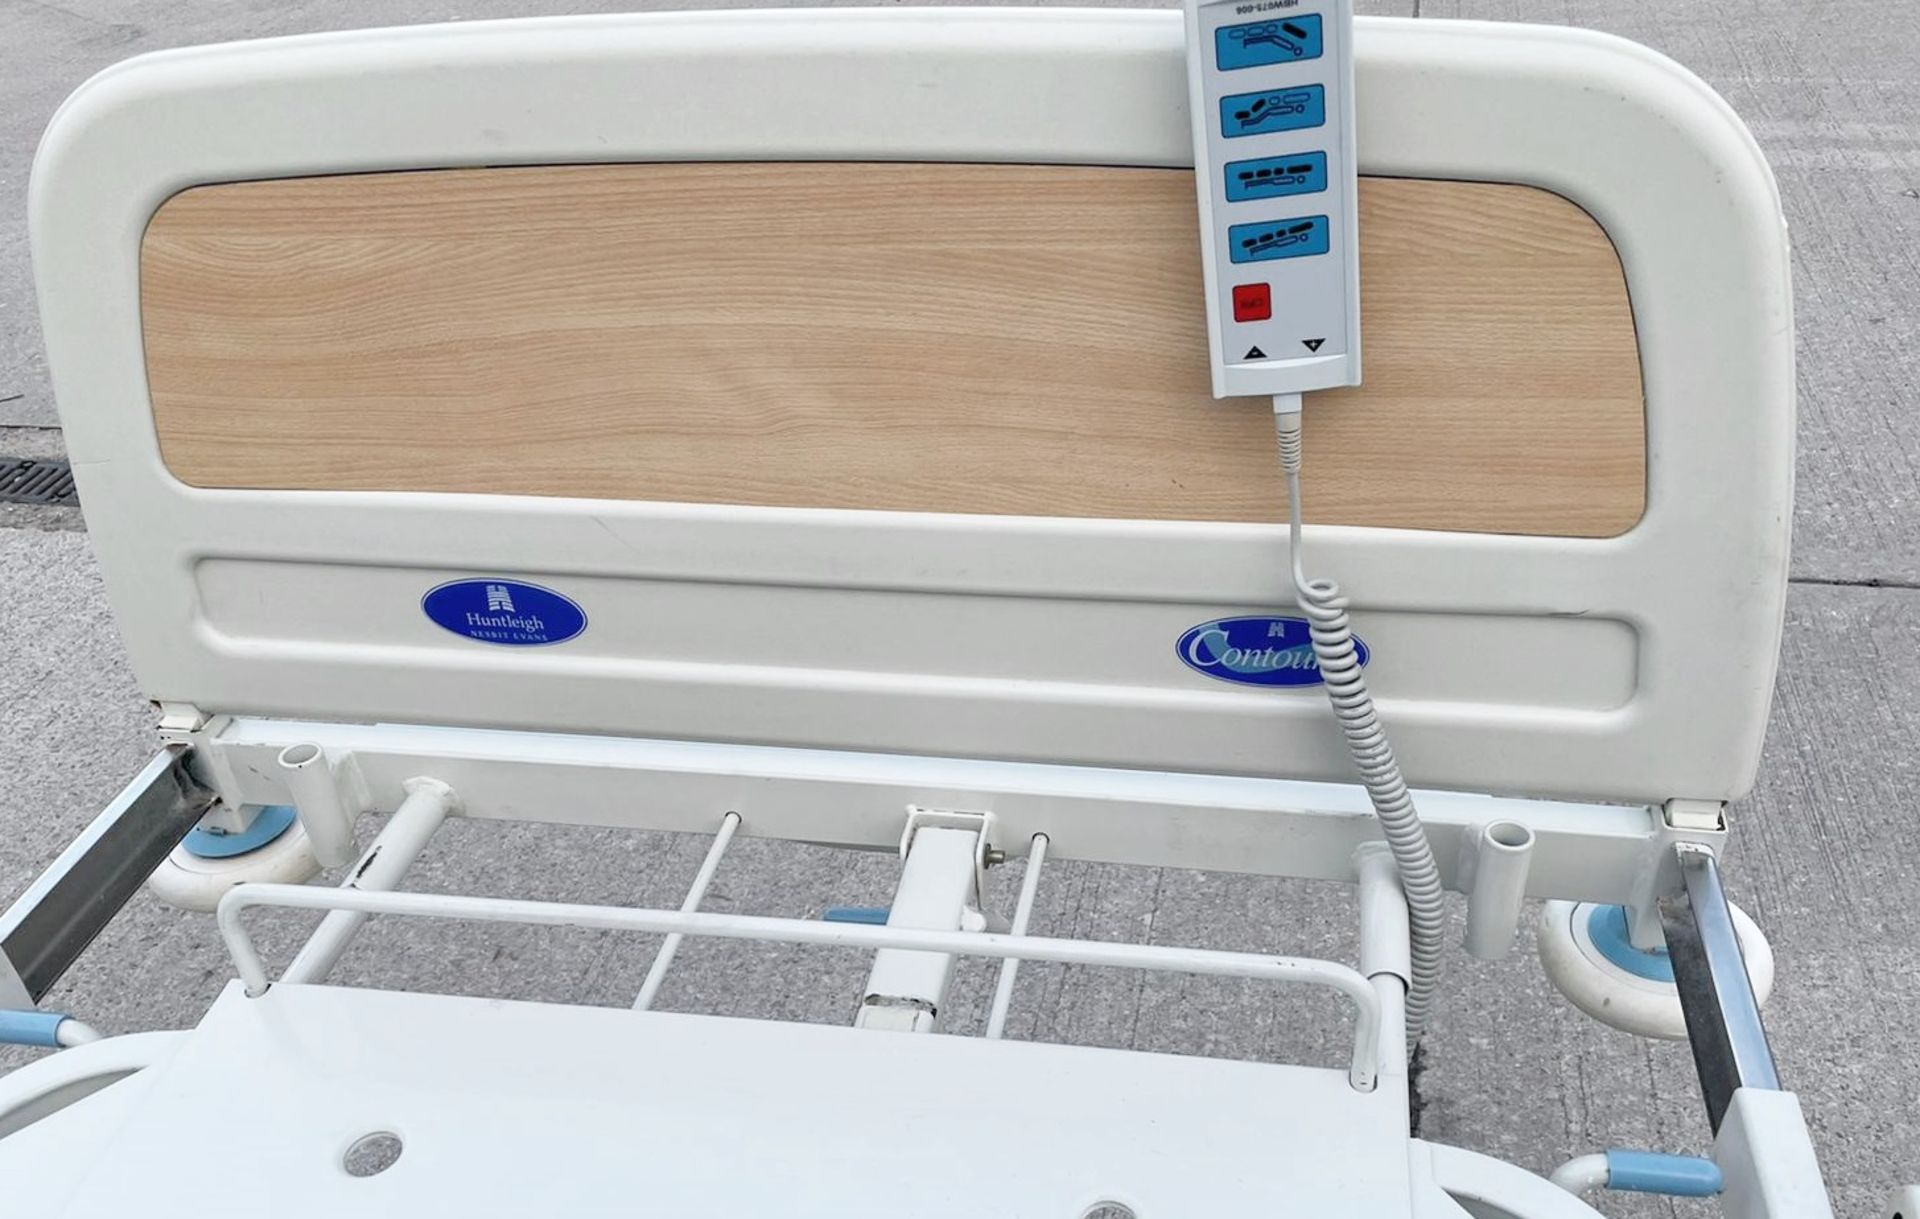 1 x Huntleigh CONTOURA Electric Hospital Bed - Features Rise/Fall 3-Way Profiling, Side Rails, - Image 3 of 13